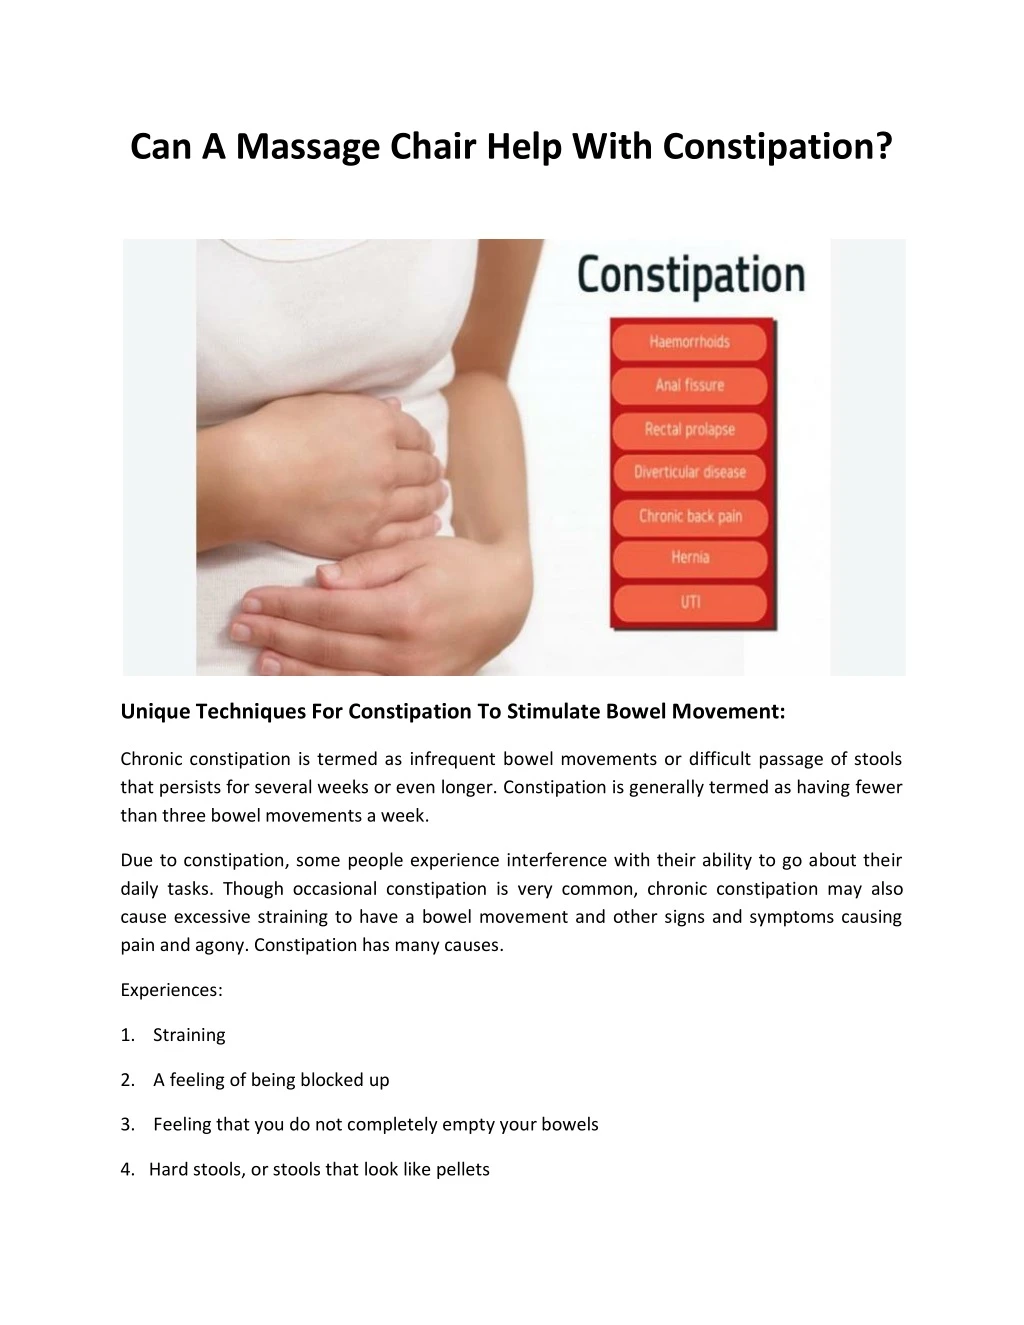 can a massage chair help with constipation